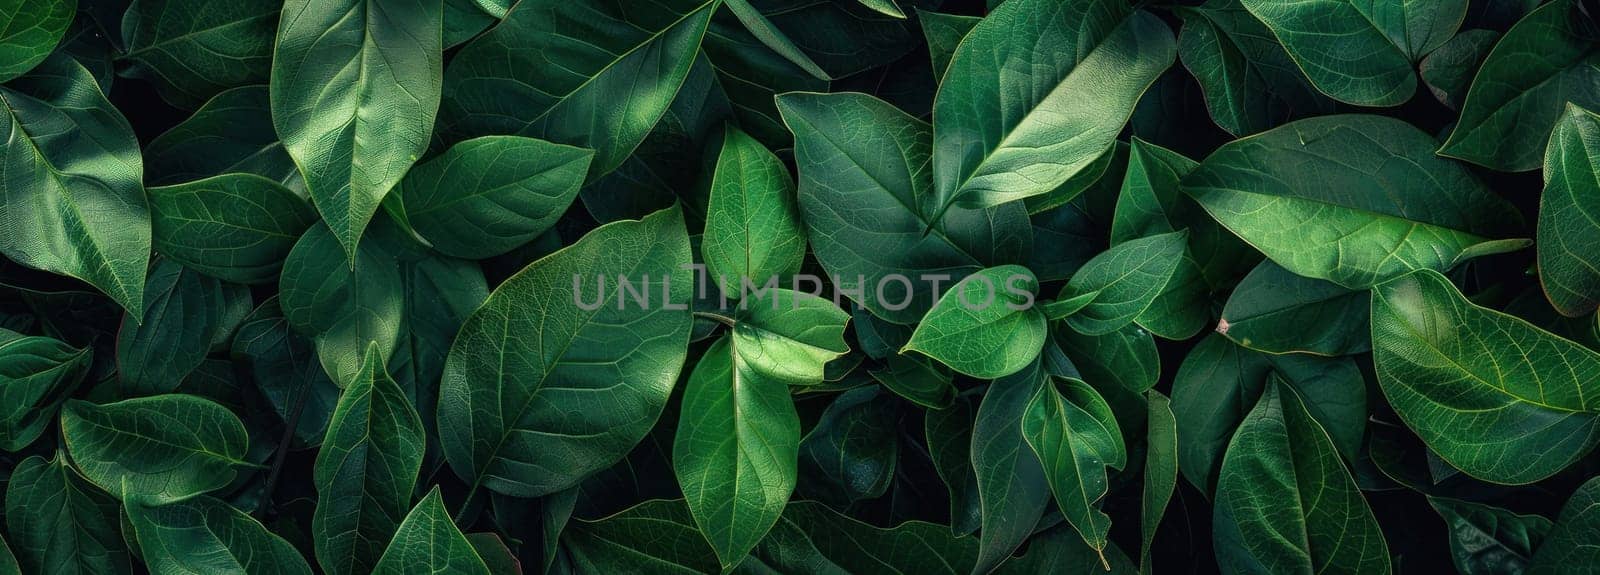 Green leaves in sunlight on black background close up view of nature and beauty with vibrant colors and contrast